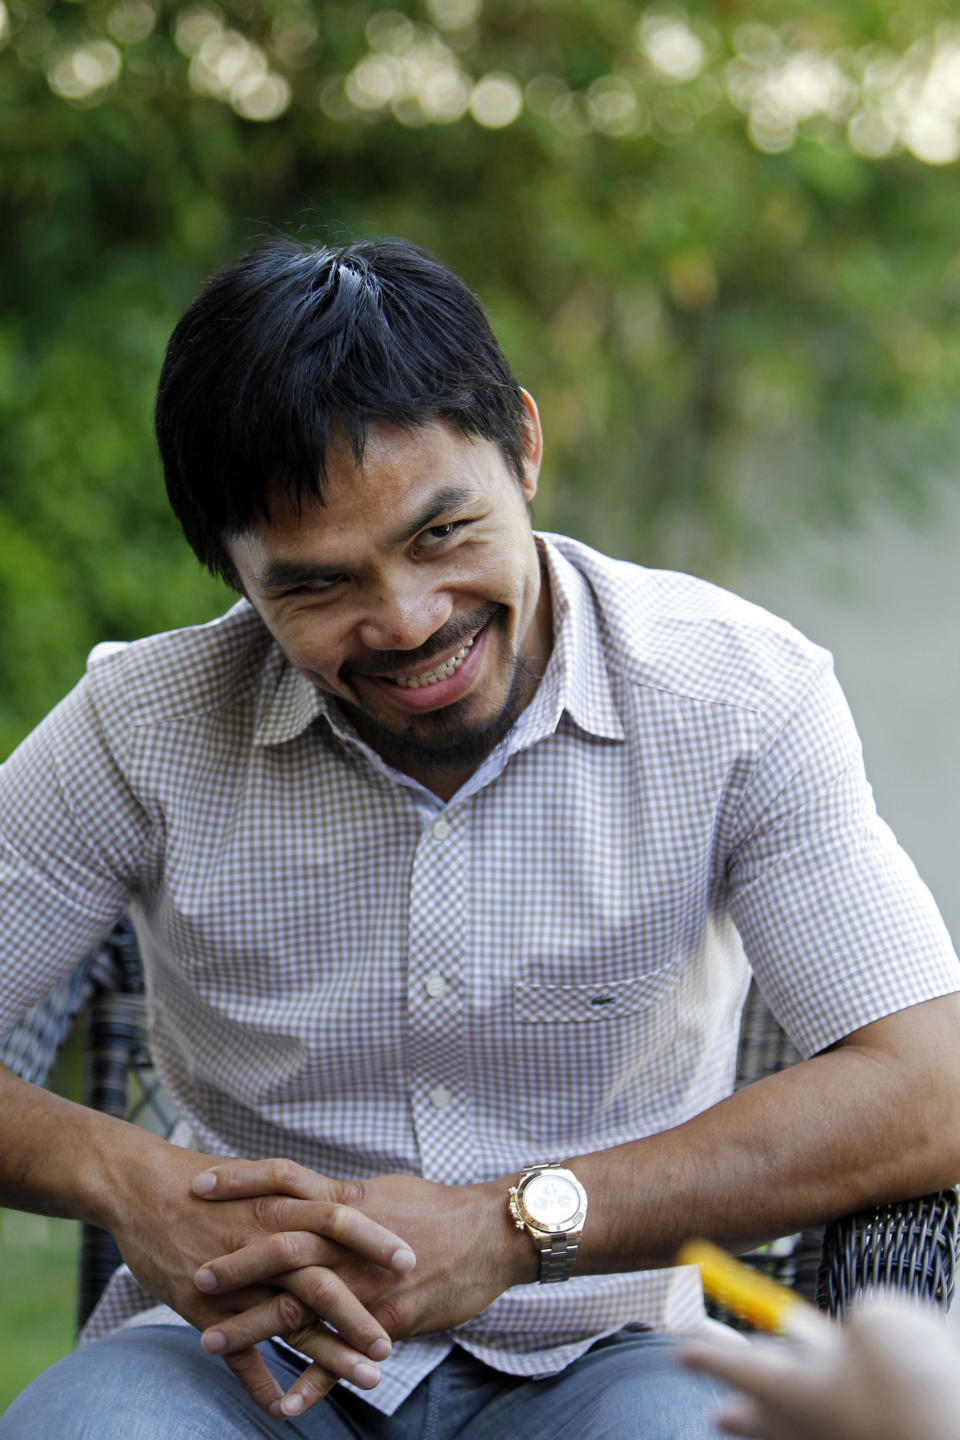 Manny Pacquiao, boxer and Philippine congressman speaks about his views on same-sex marriage at his home in Los Angeles on Wednesday, May 16, 2012. Pacquiao says he loves and supports gays and lesbians, even though he does not approve of gay marriage. (AP Photo/Reed Saxon)